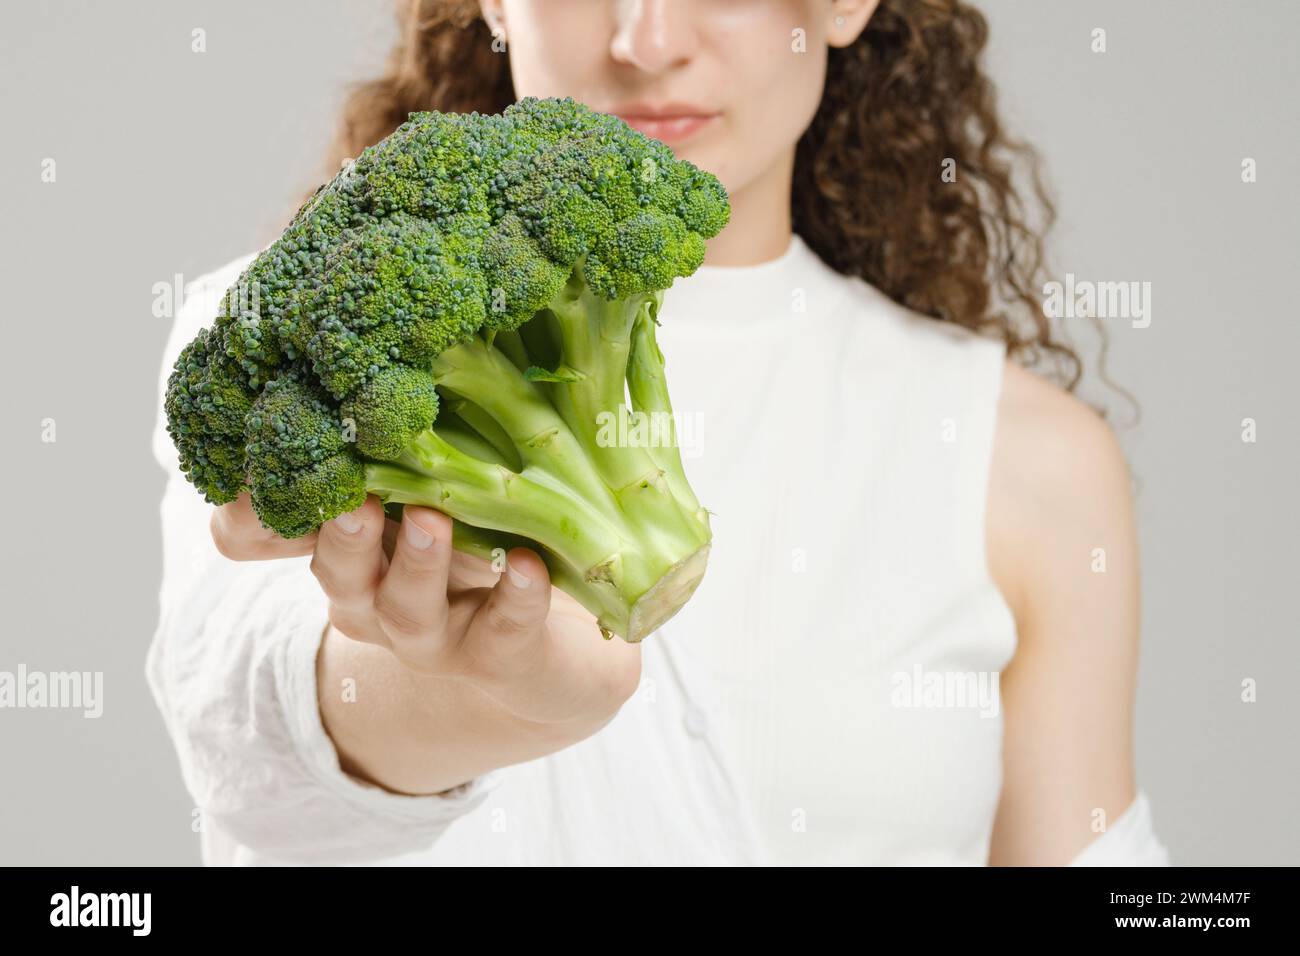 Unrecognizable woman holding broccoli in her outstretched hand, focus on foreground Stock Photo